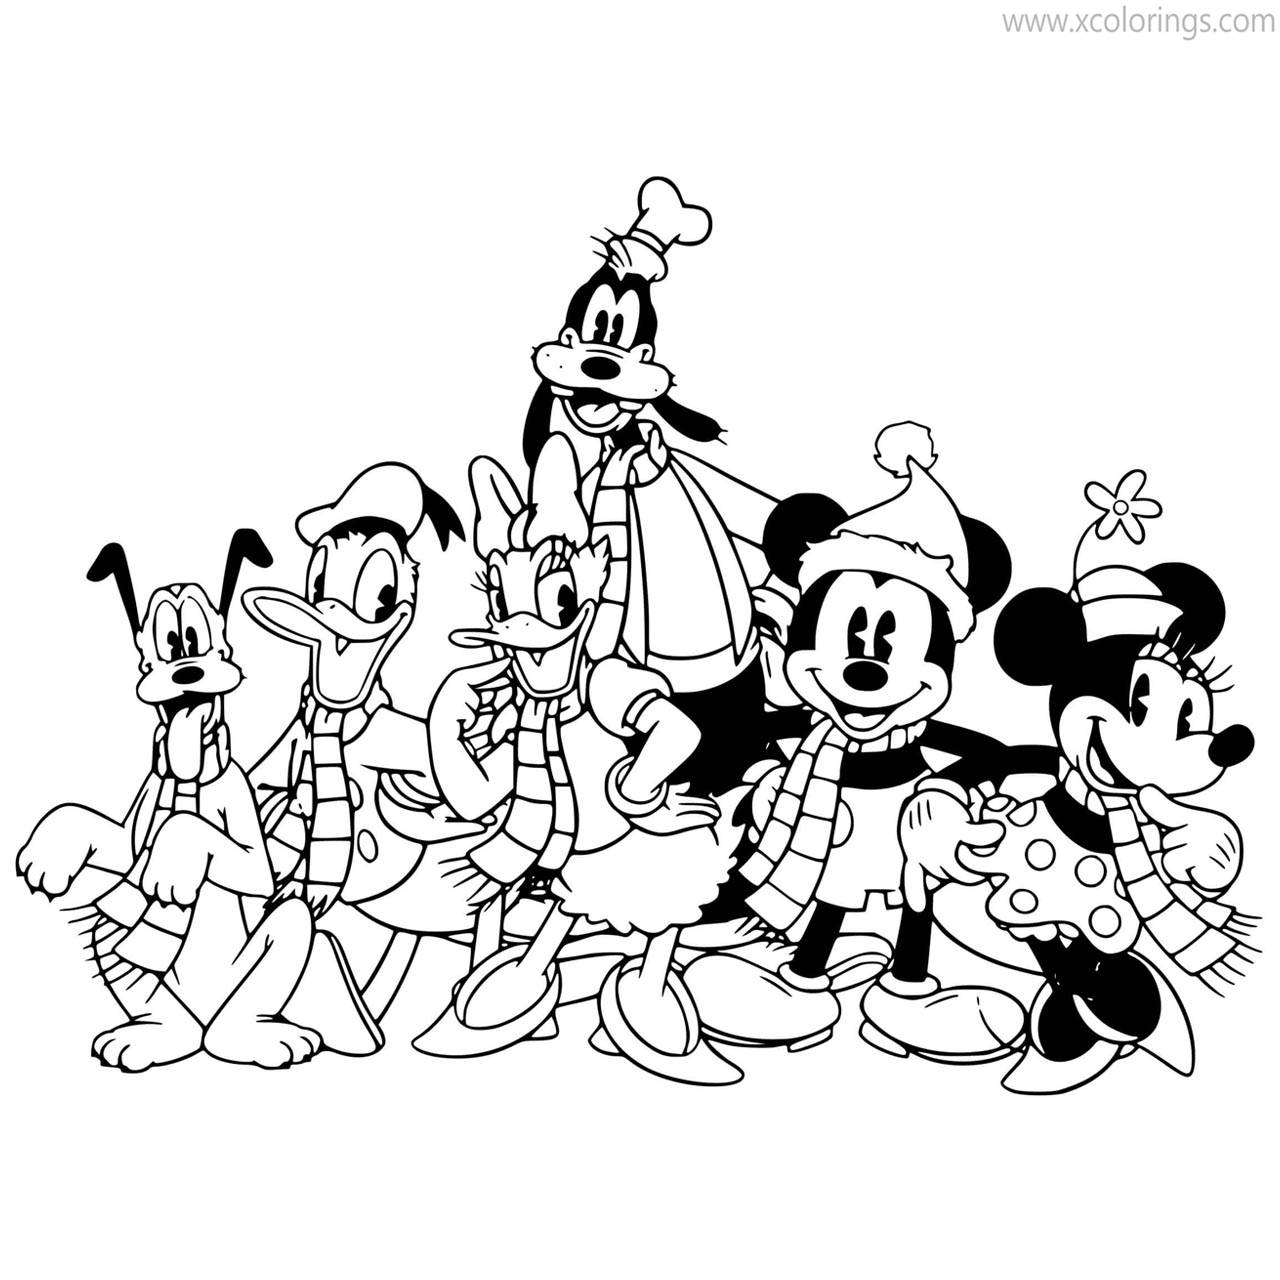 Free Mickey Mouse Characteres Christmas Coloring Pages printable